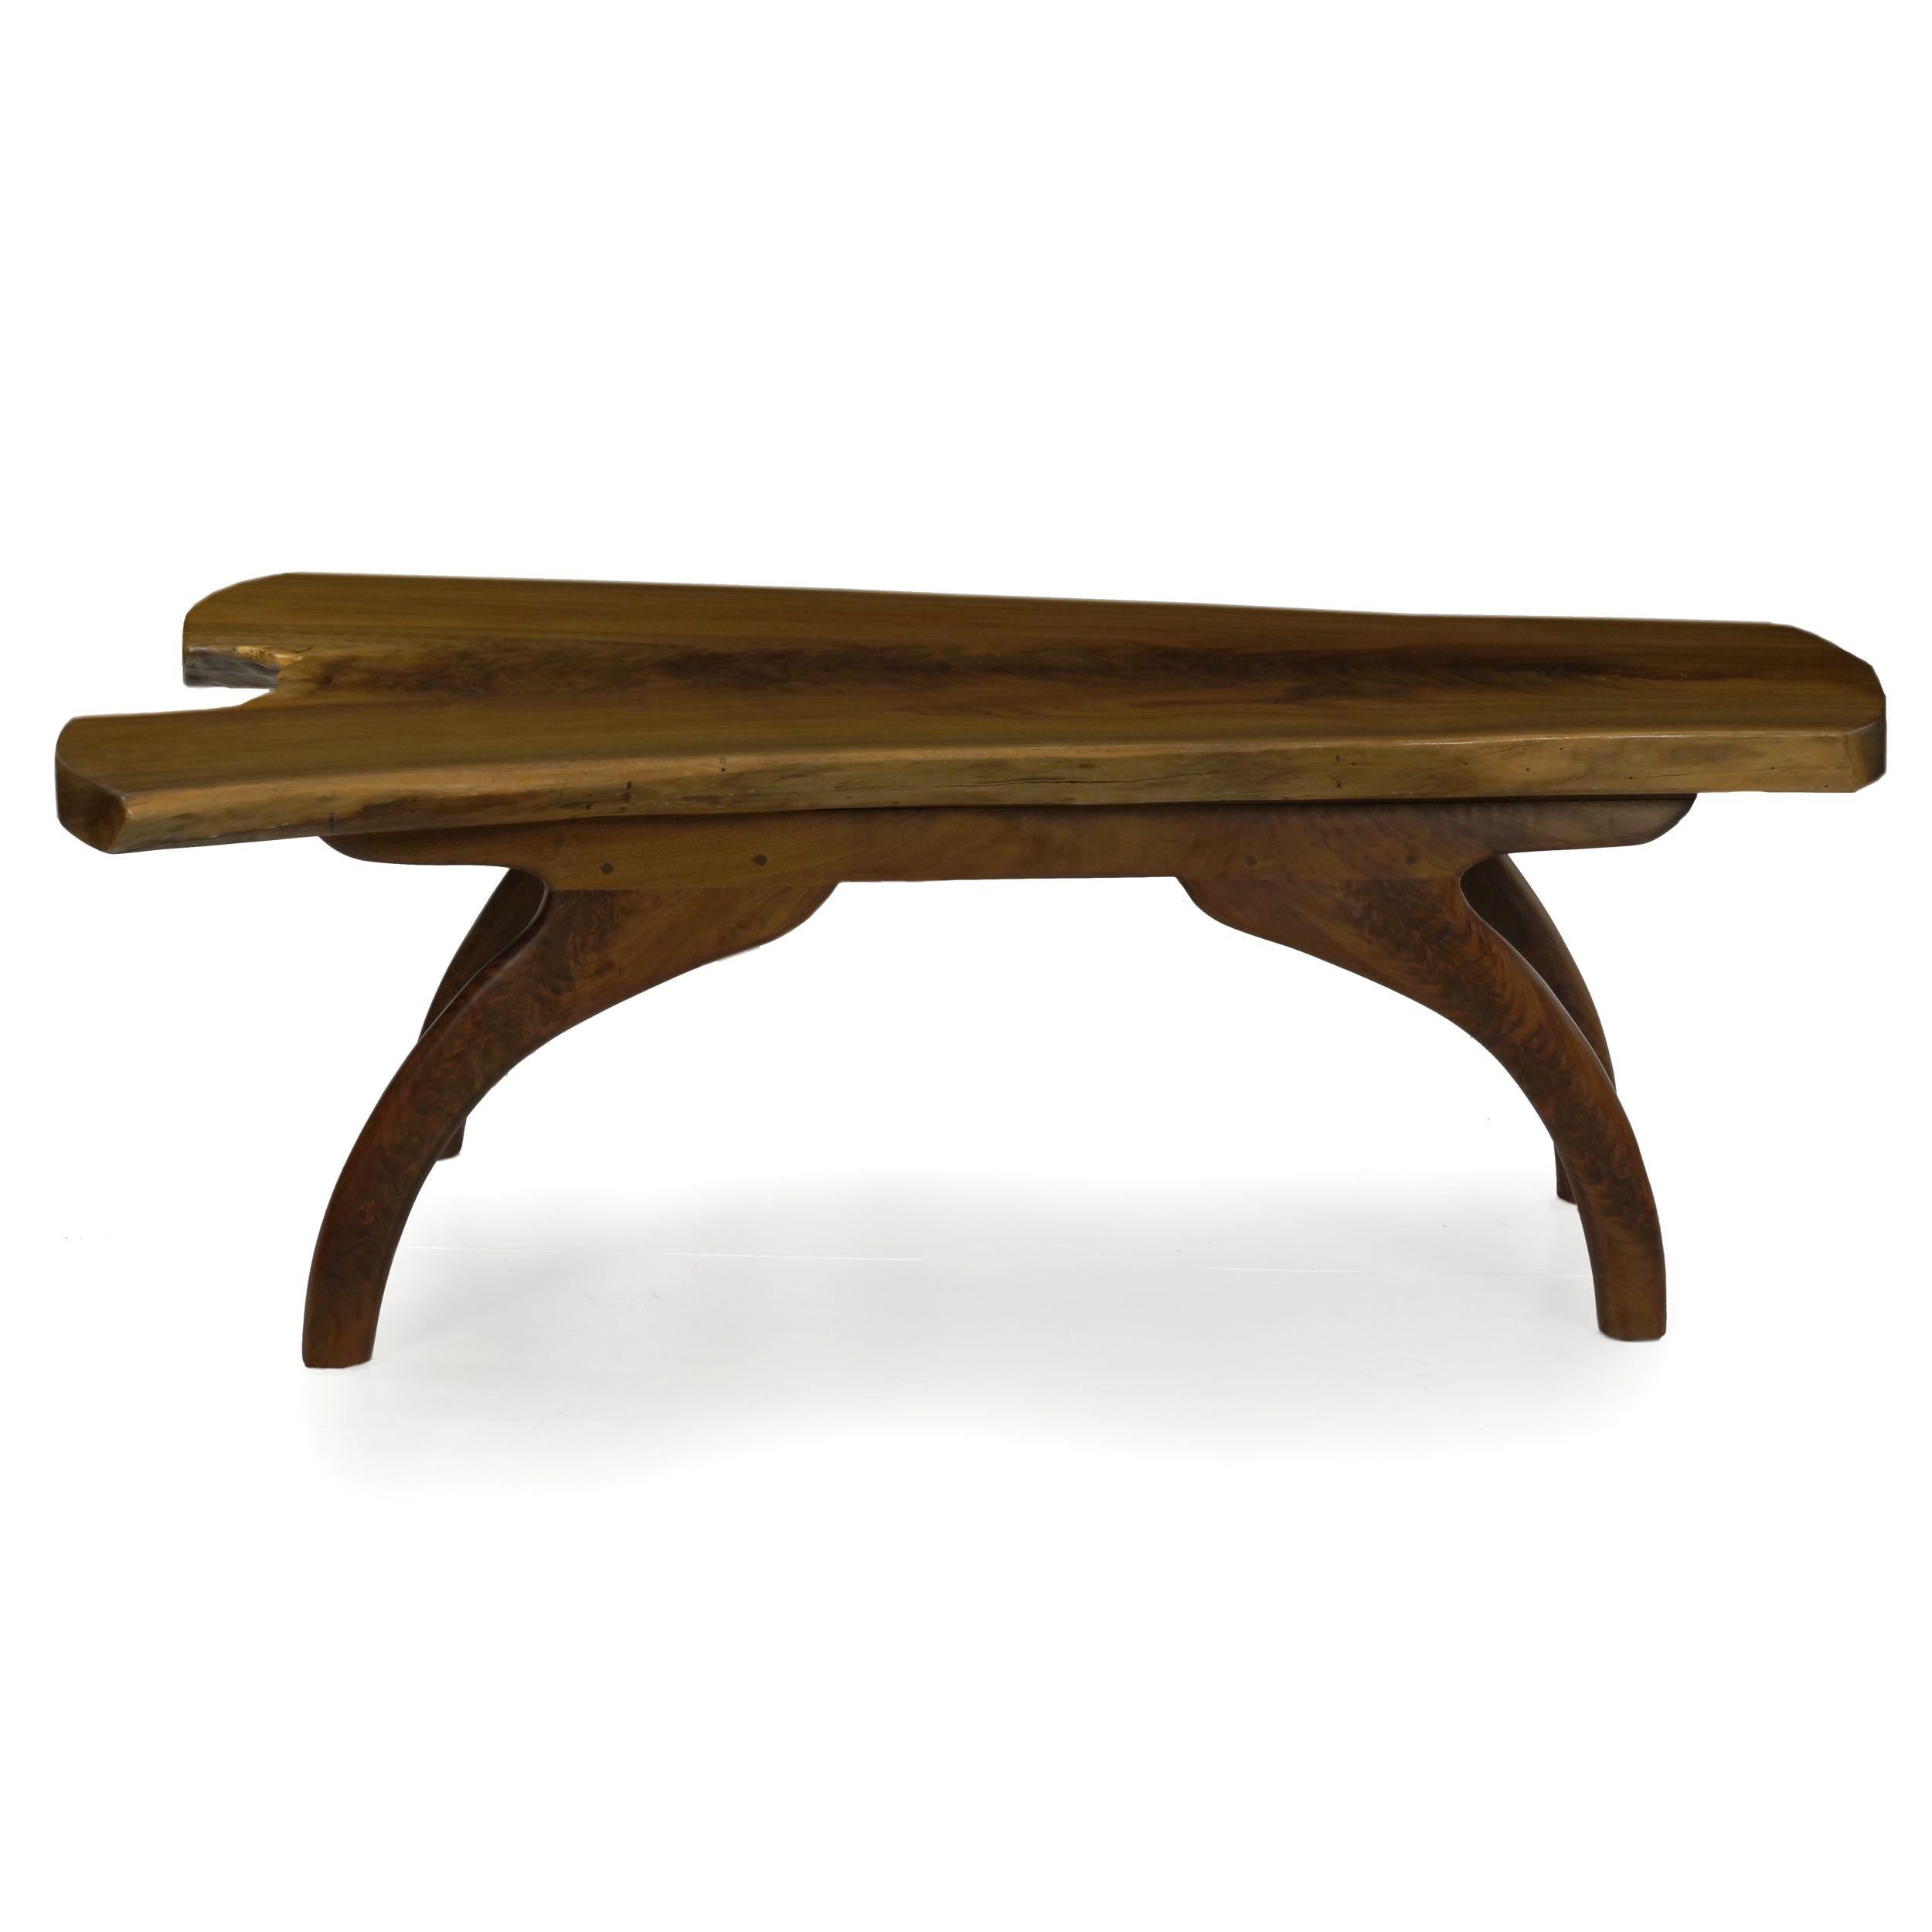 MODERN FREE-FORM LIVE EDGE WALNUT COFFEE TABLE
By Philip Andrews, ca. 2000s; branded to underside
Item # 604ILH15P 

An unusual and powerful design by craftsman Philip Andrews, it features a stunning thick solid plank of walnut captured where the